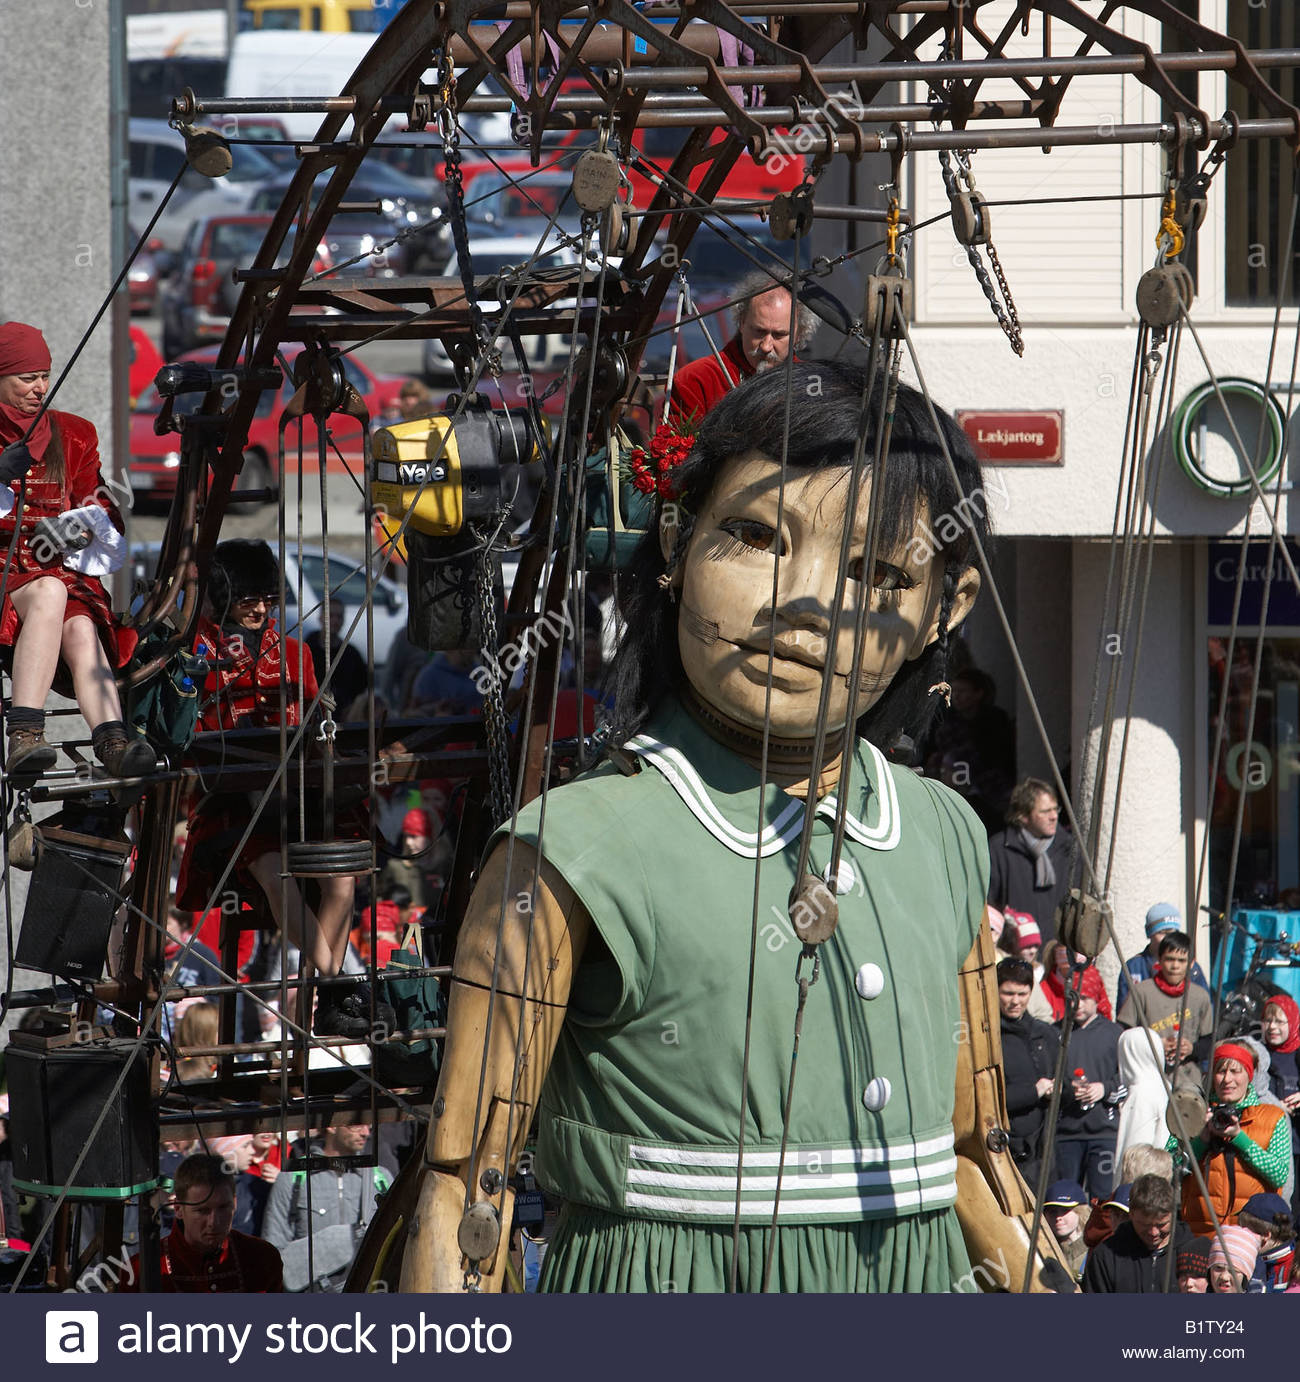 Albums 90+ Wallpaper Giant Puppets Of Royal De Luxe Latest